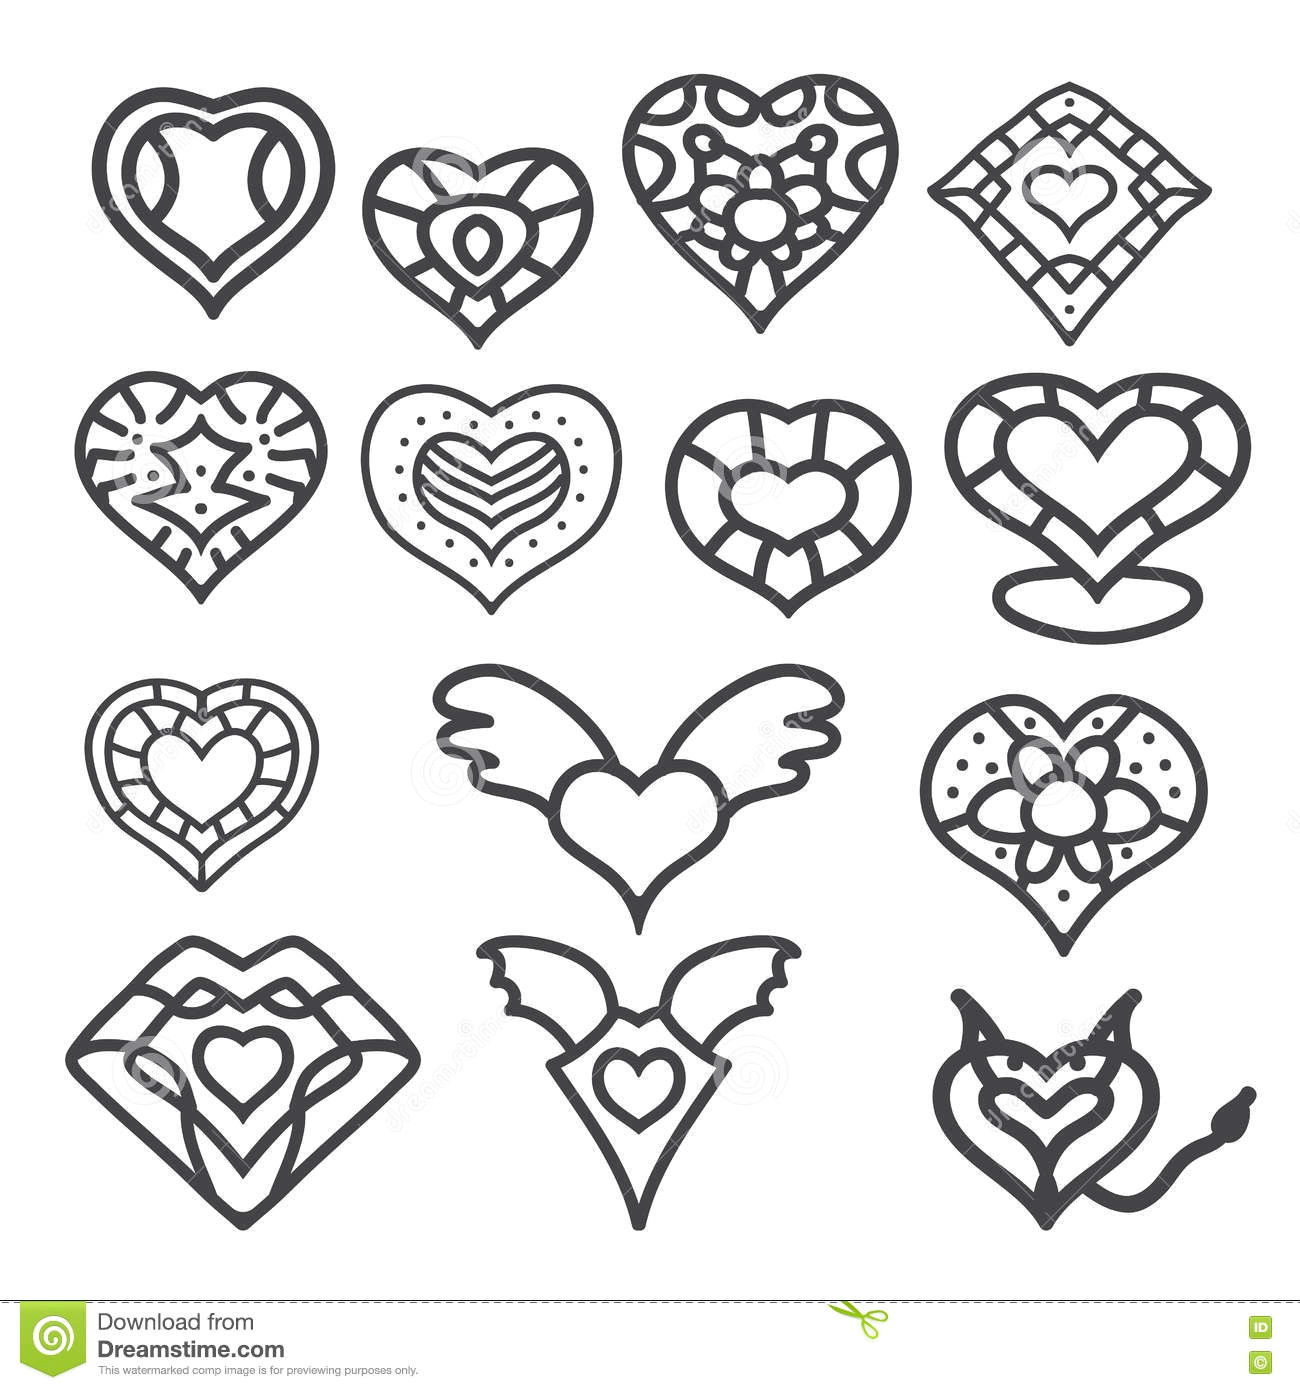 Line Drawing Of A Heart Shape Heart Symbol Hand Drawn Stock Vector Illustration Of Graphic 72854274